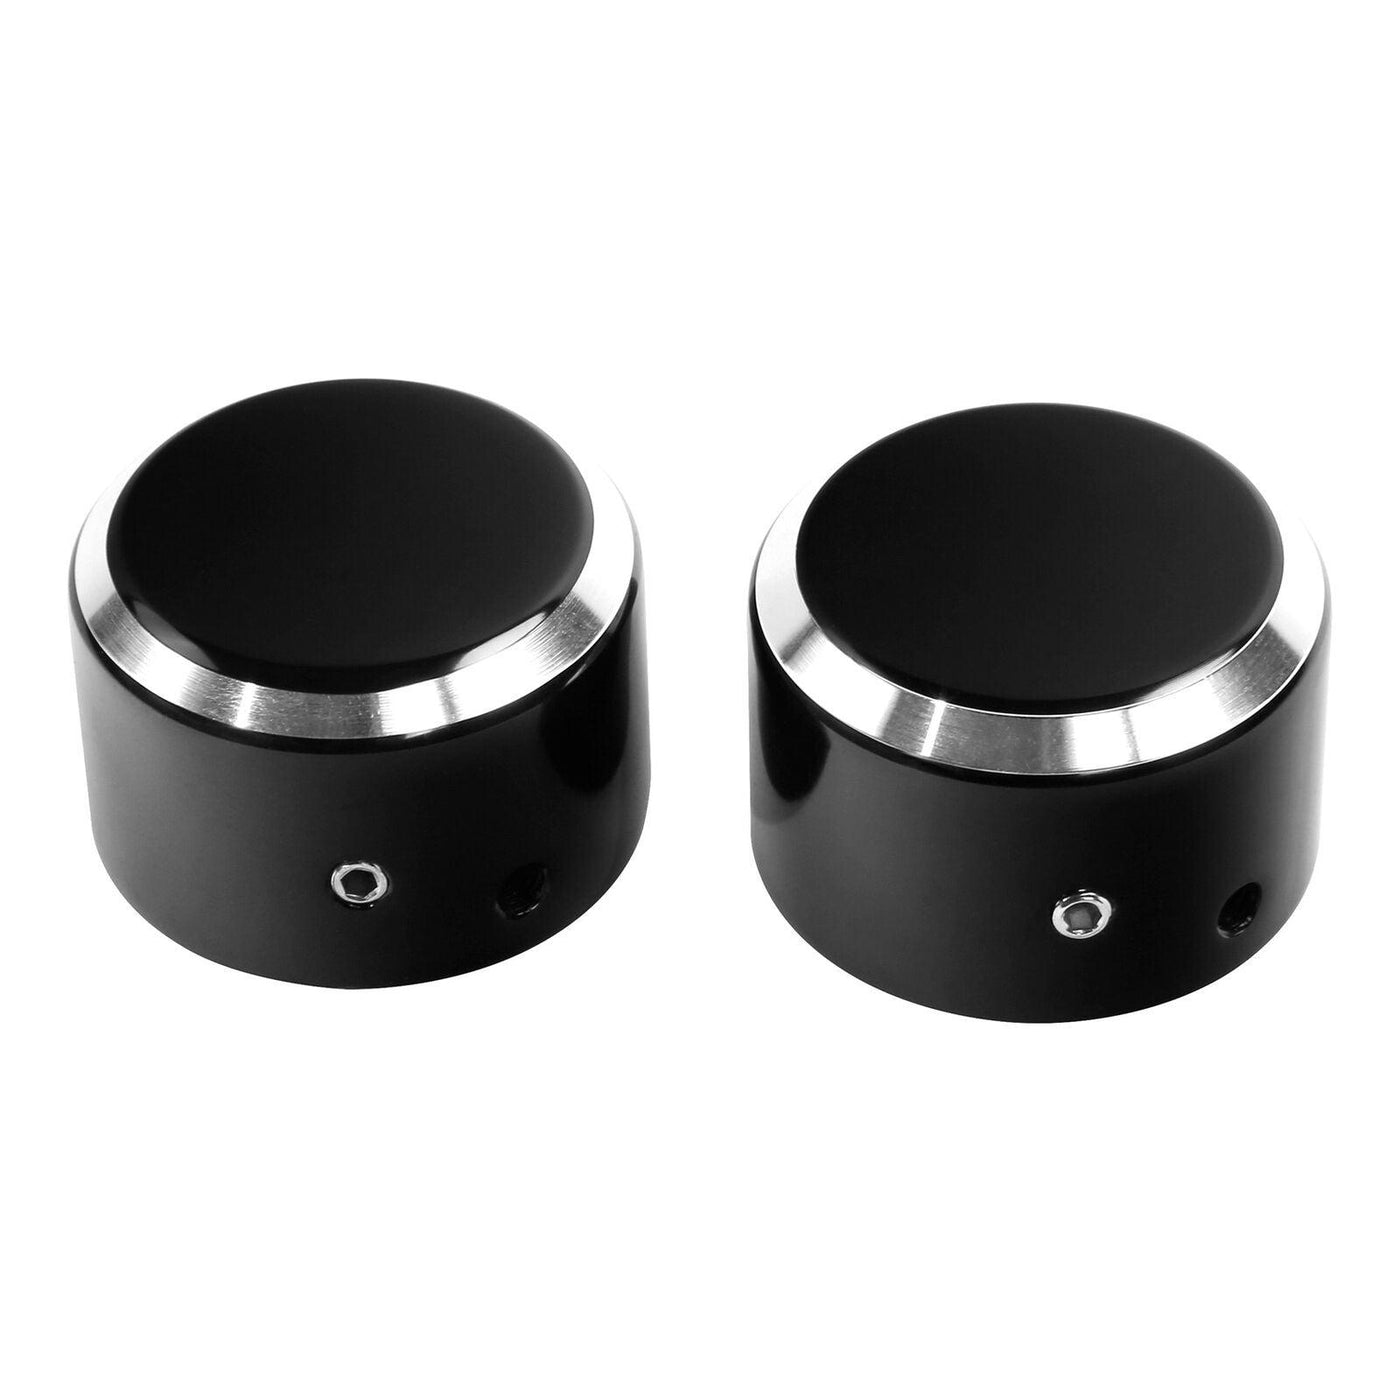 Black Front Axle Nut Covers Bolt Kit Fit For Harley Touring Dyna Softail - Moto Life Products